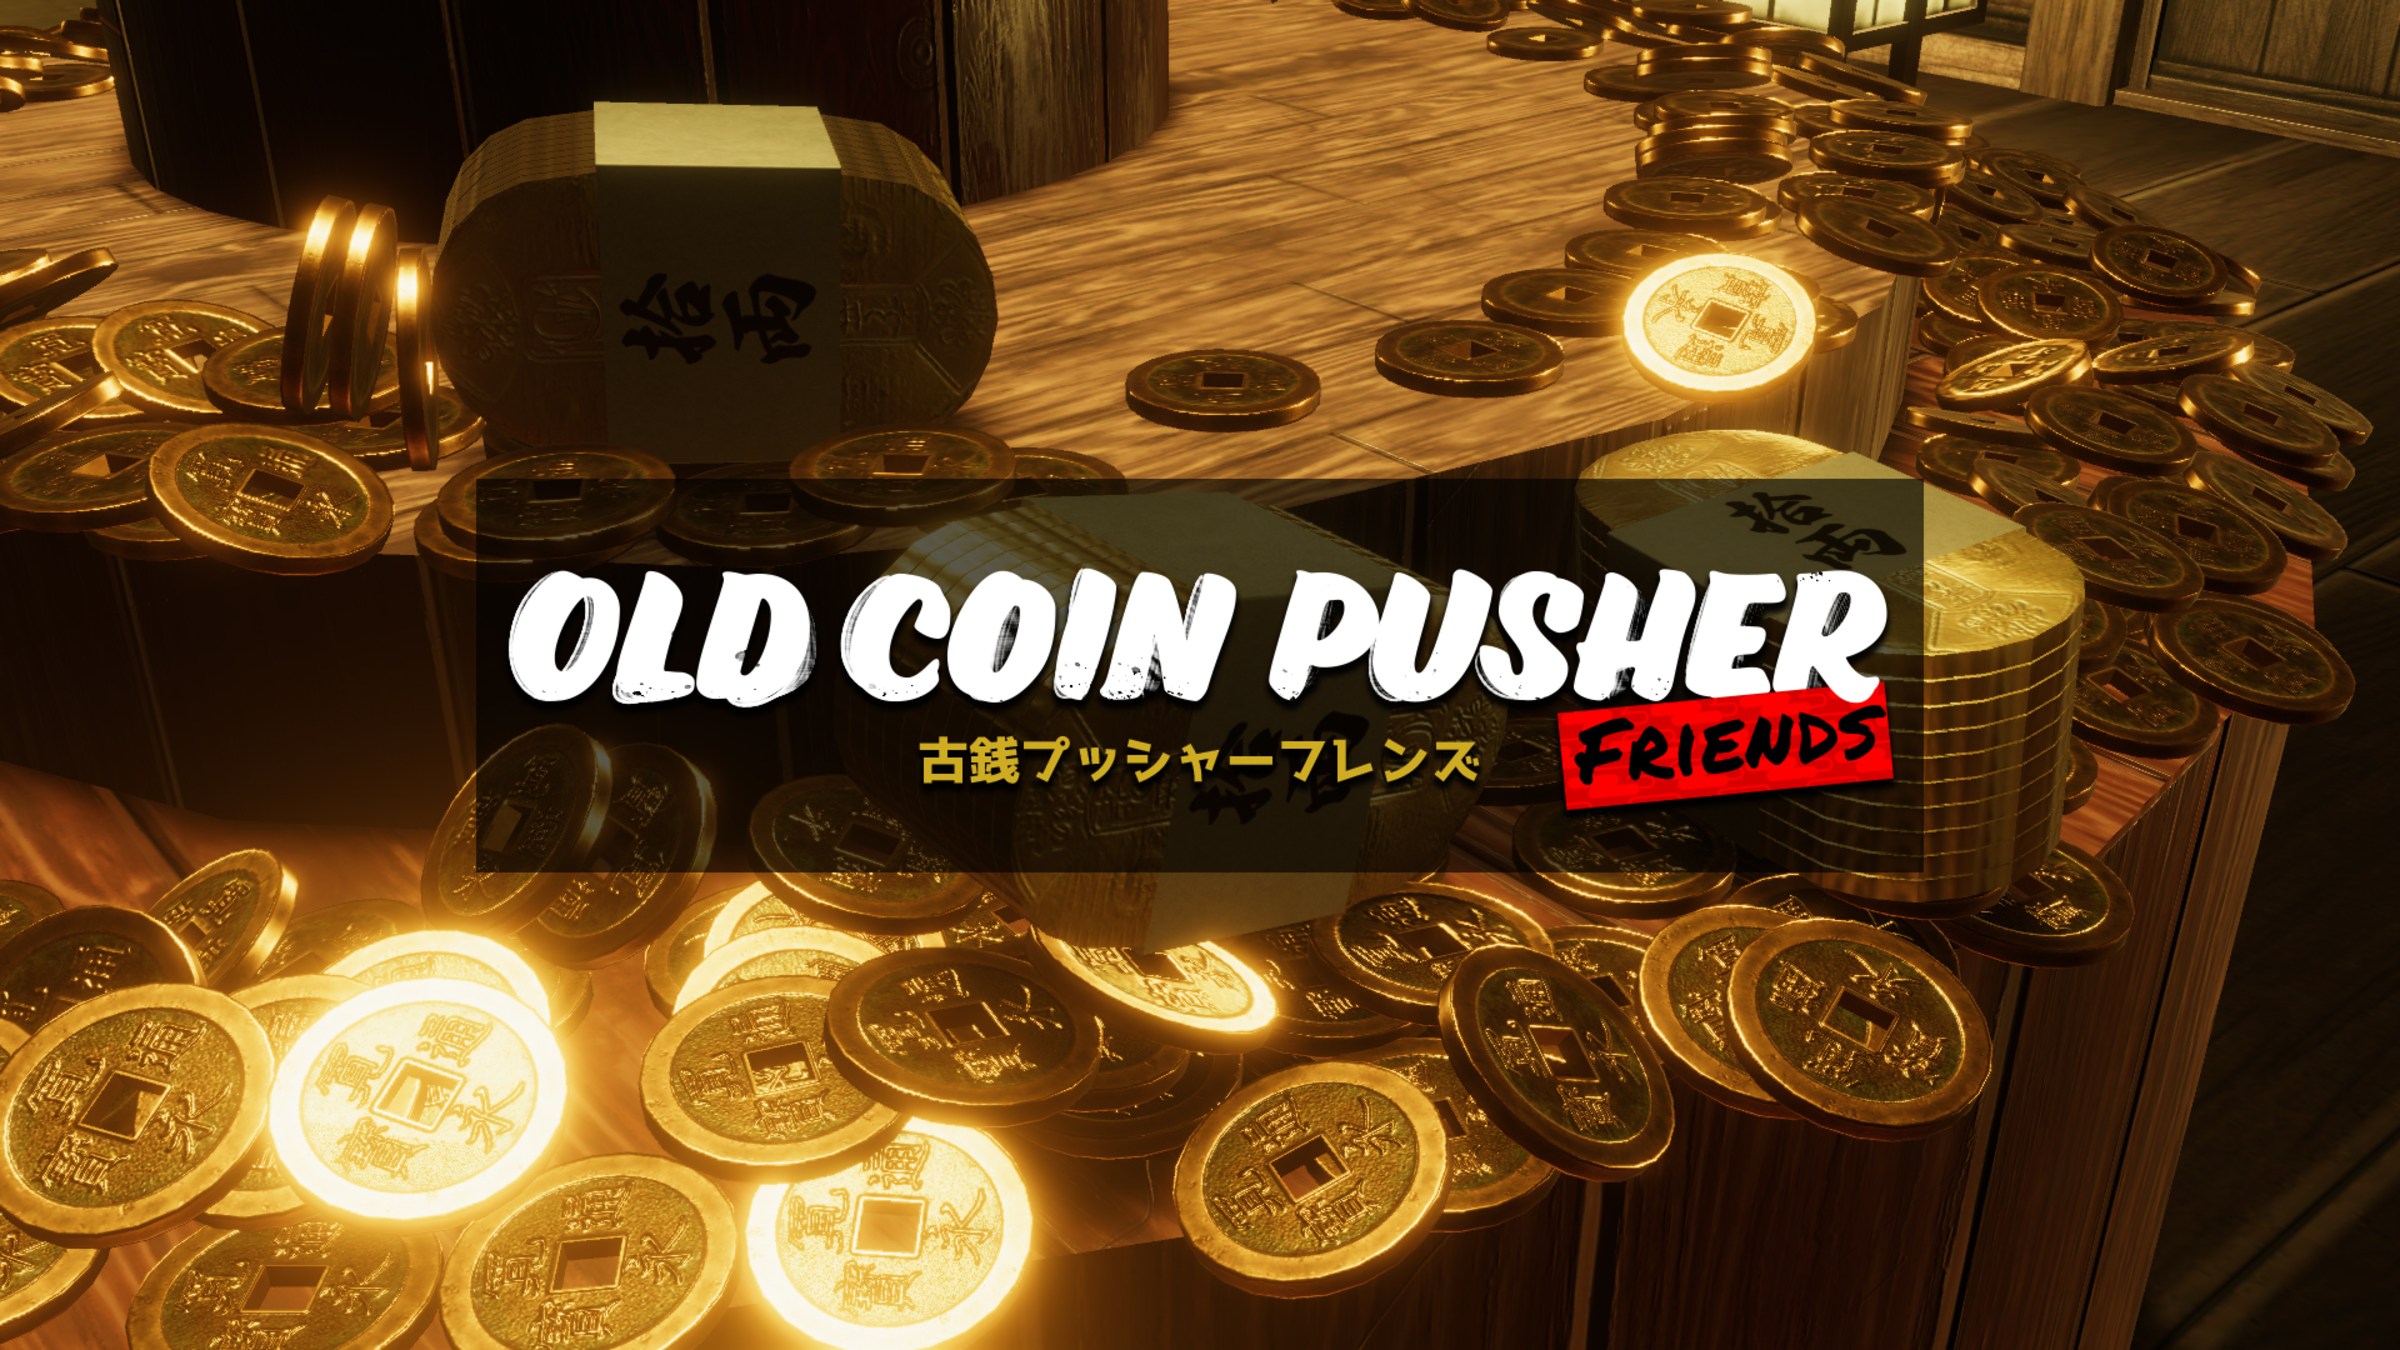 Old Coin Pusher Friends for Nintendo Switch - Nintendo Official Site